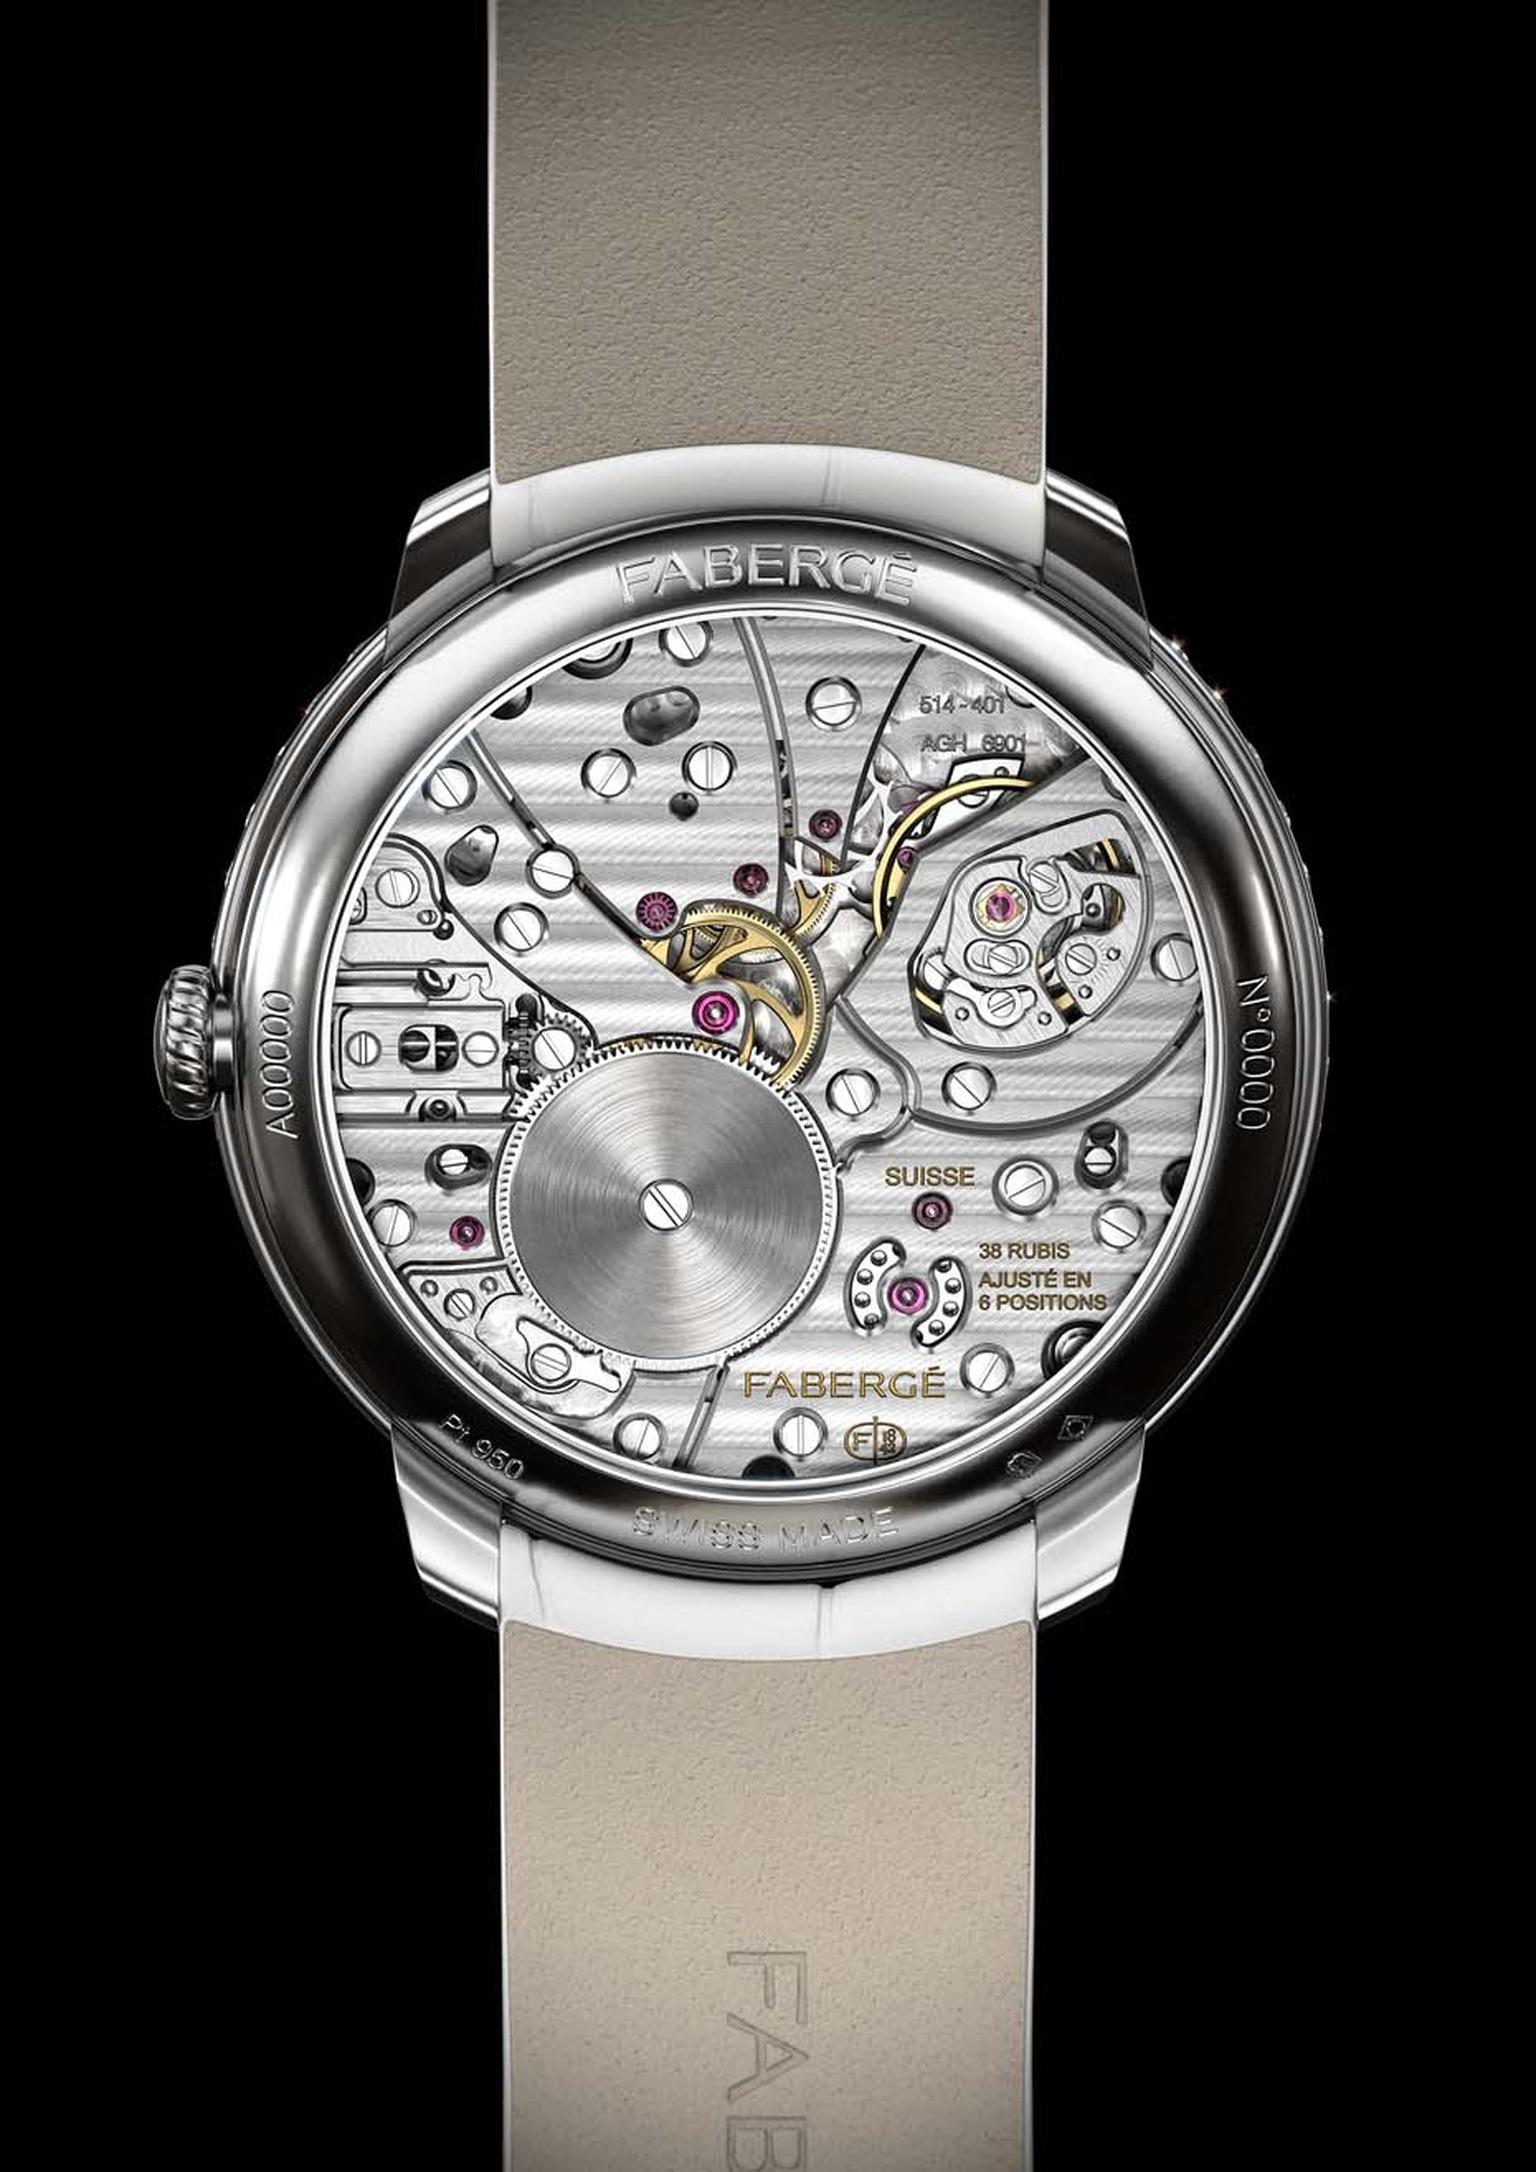 Both timepieces in Fabergé's new Lady Compliquée collection feature specially designed movements by Jean-Marc Wiederrecht of Agenhor. The 38mm platinum case houses the extremely complex hand-wound movement, which gives life to the retrograde minutes, the 